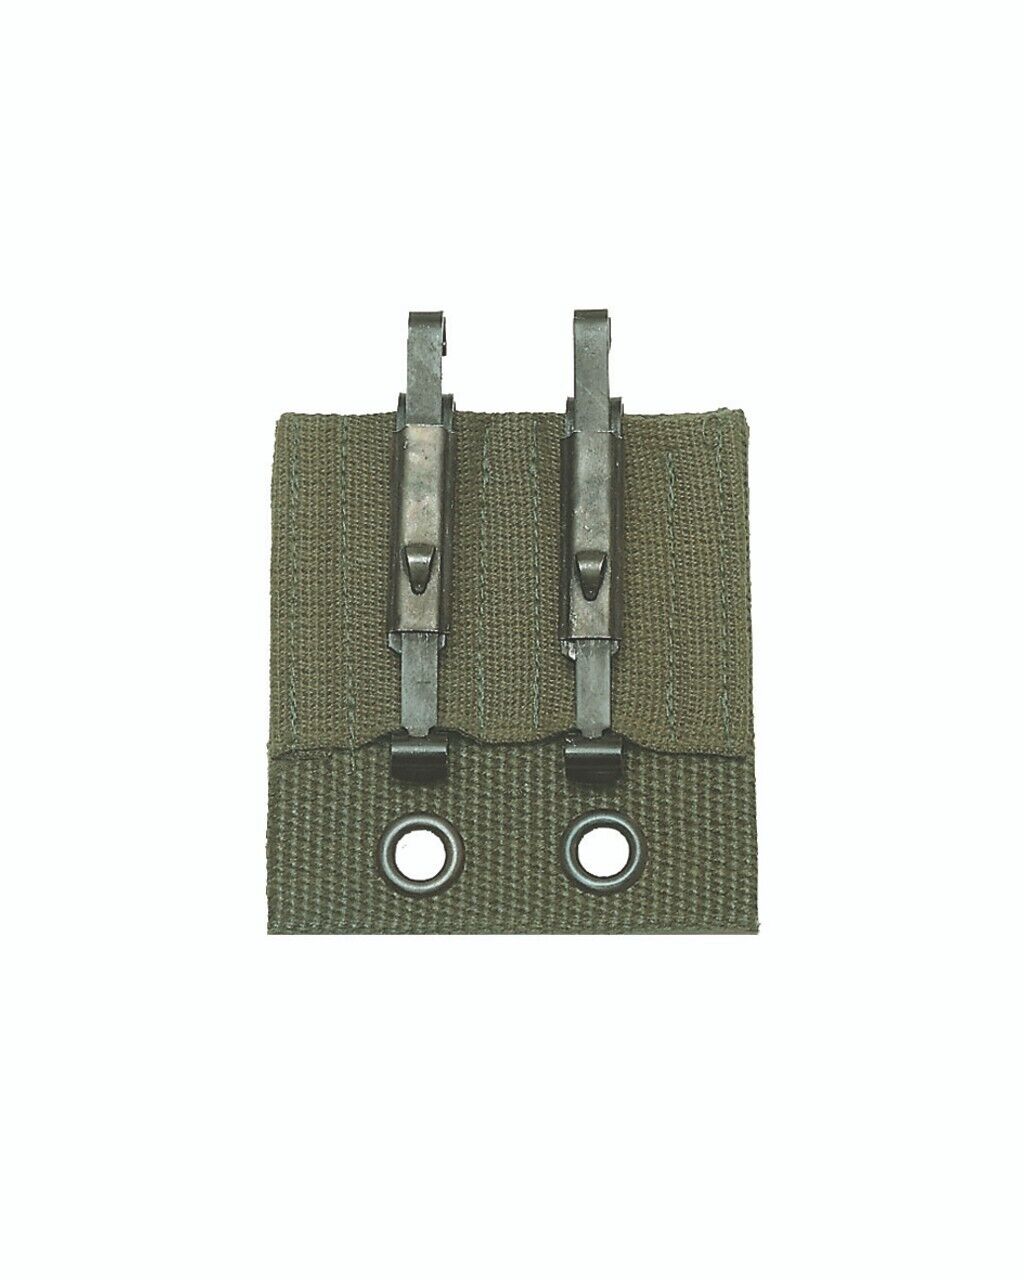 German Style Harness ALICE Clip Adaptor Bundeswehr Military OD Green Attachment